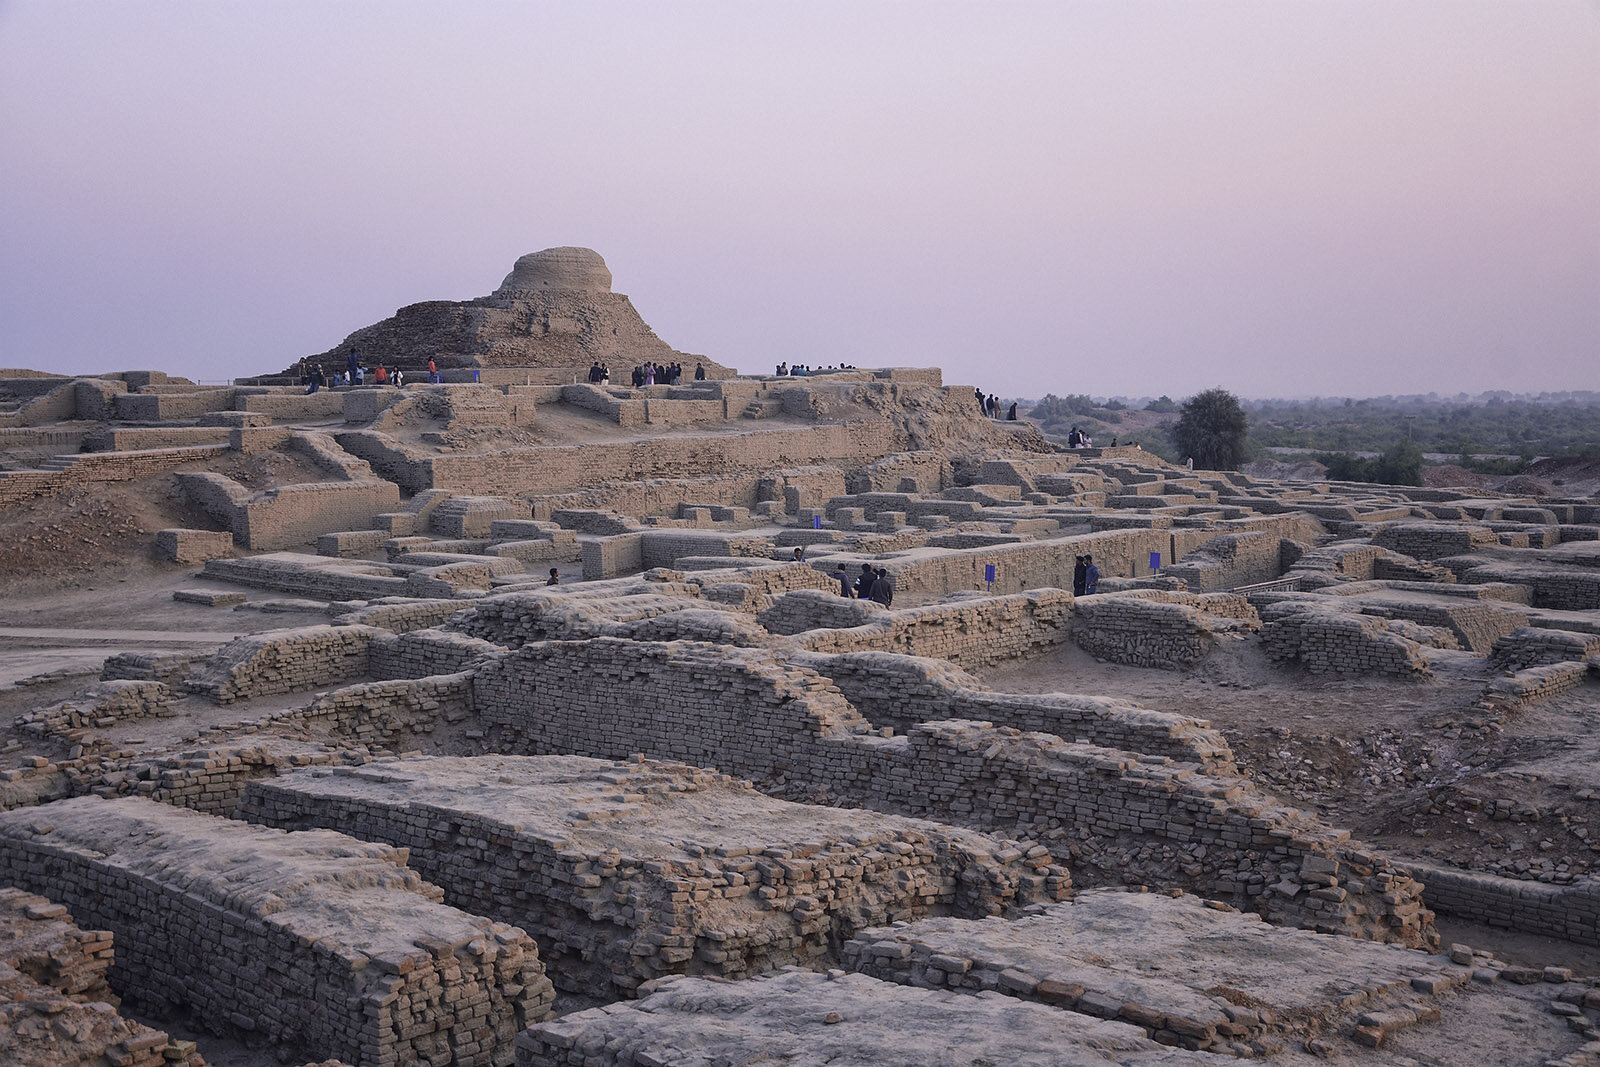 The ancient ruins of Mohenjo-daro